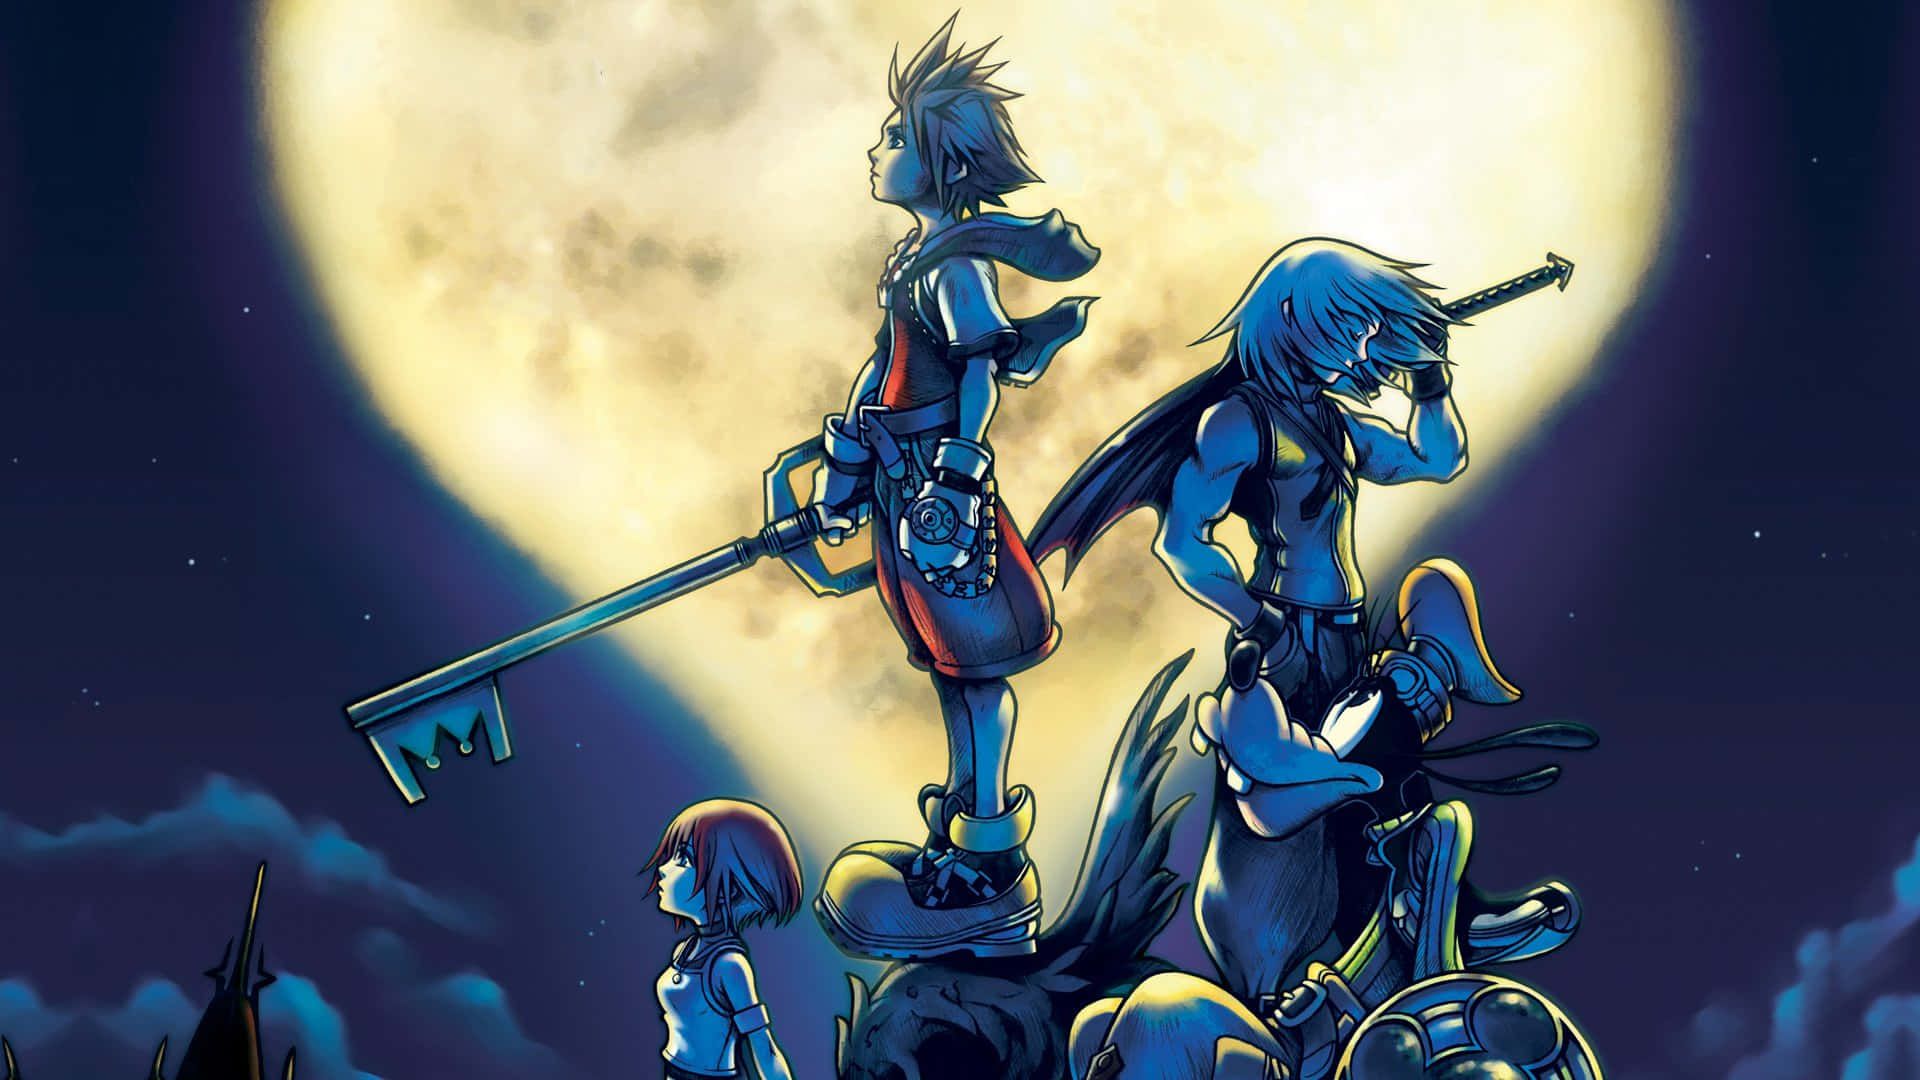 Sora bravely embarks on an epic journey through Kingdom Hearts. Wallpaper